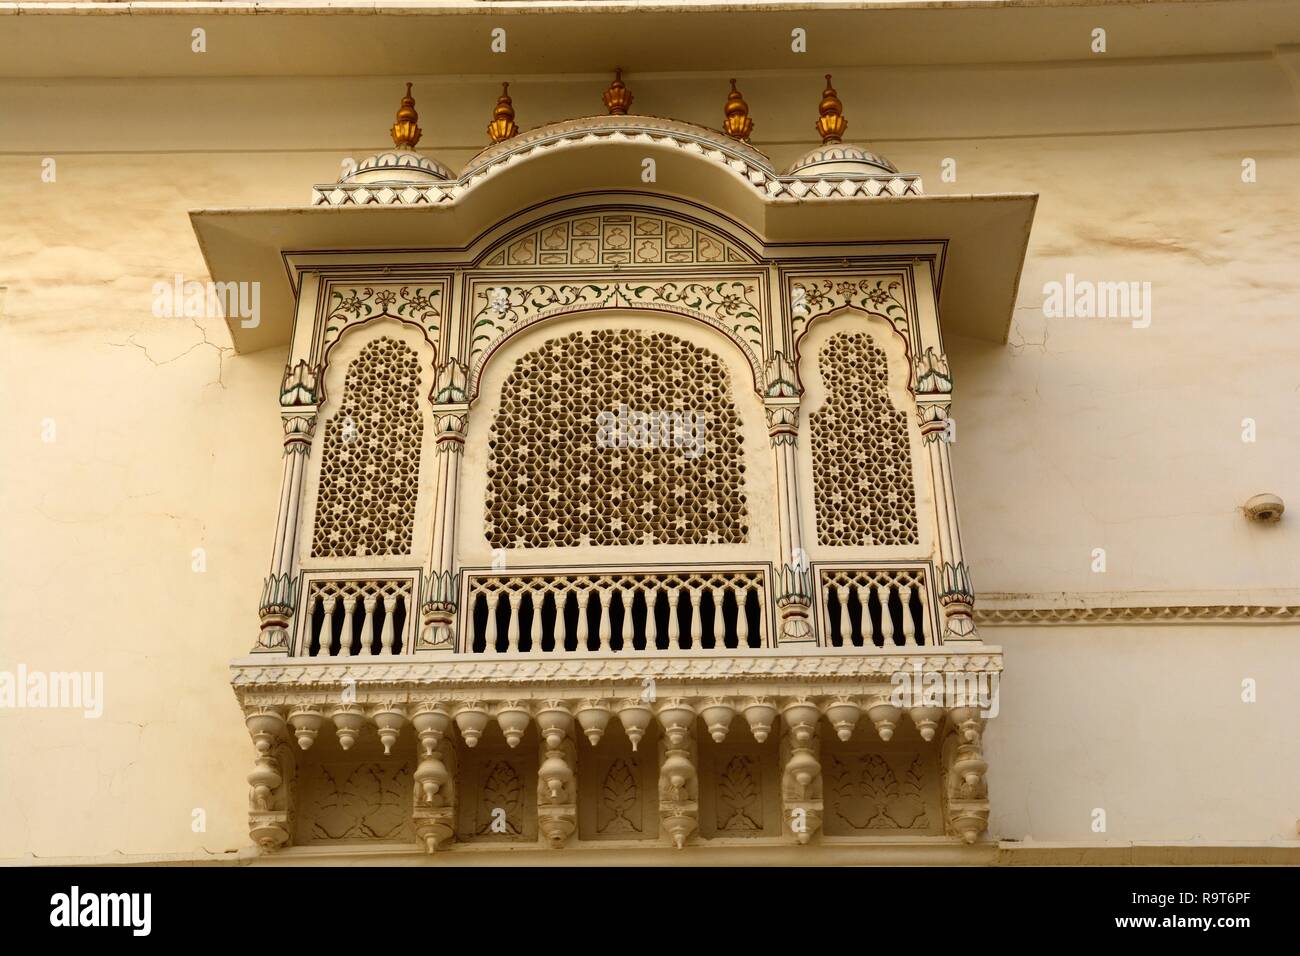 Ornately carved stone window or Jharokha overhanging balcony Harem window to allow women to see but not be seen Junagarh Fort Bikaner Rajashan India Stock Photo